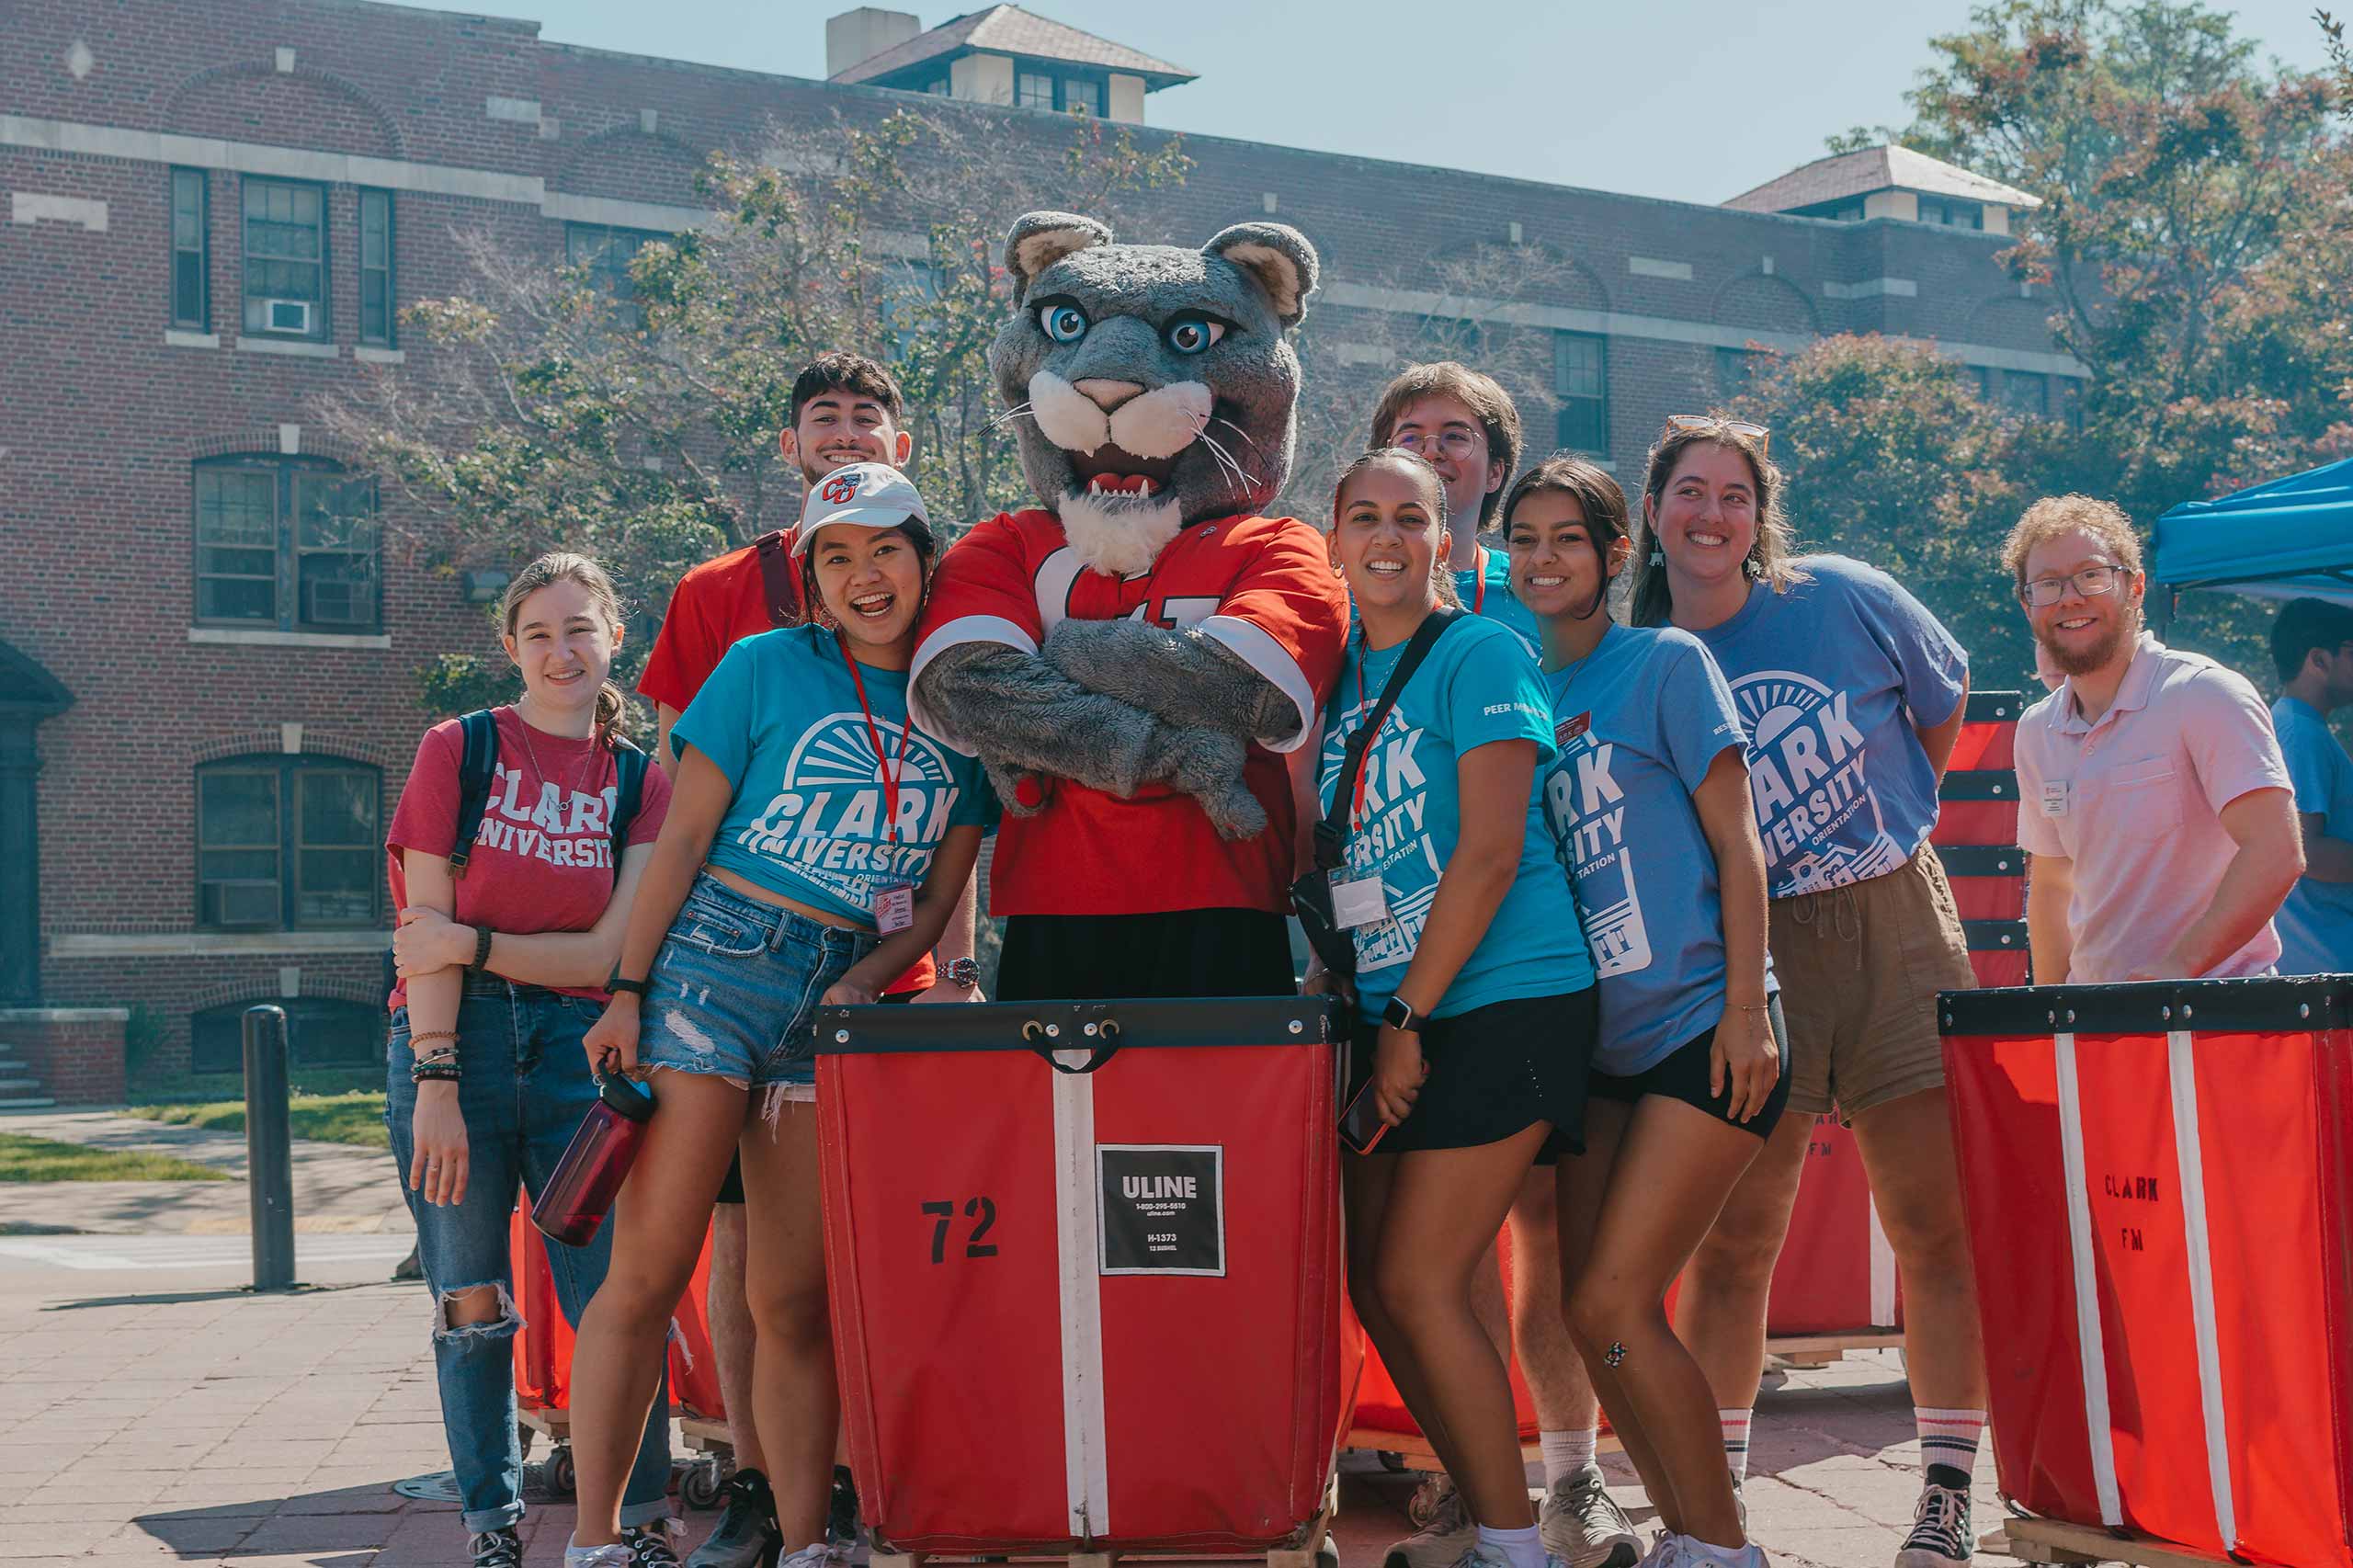 the cougar mascot posing with students